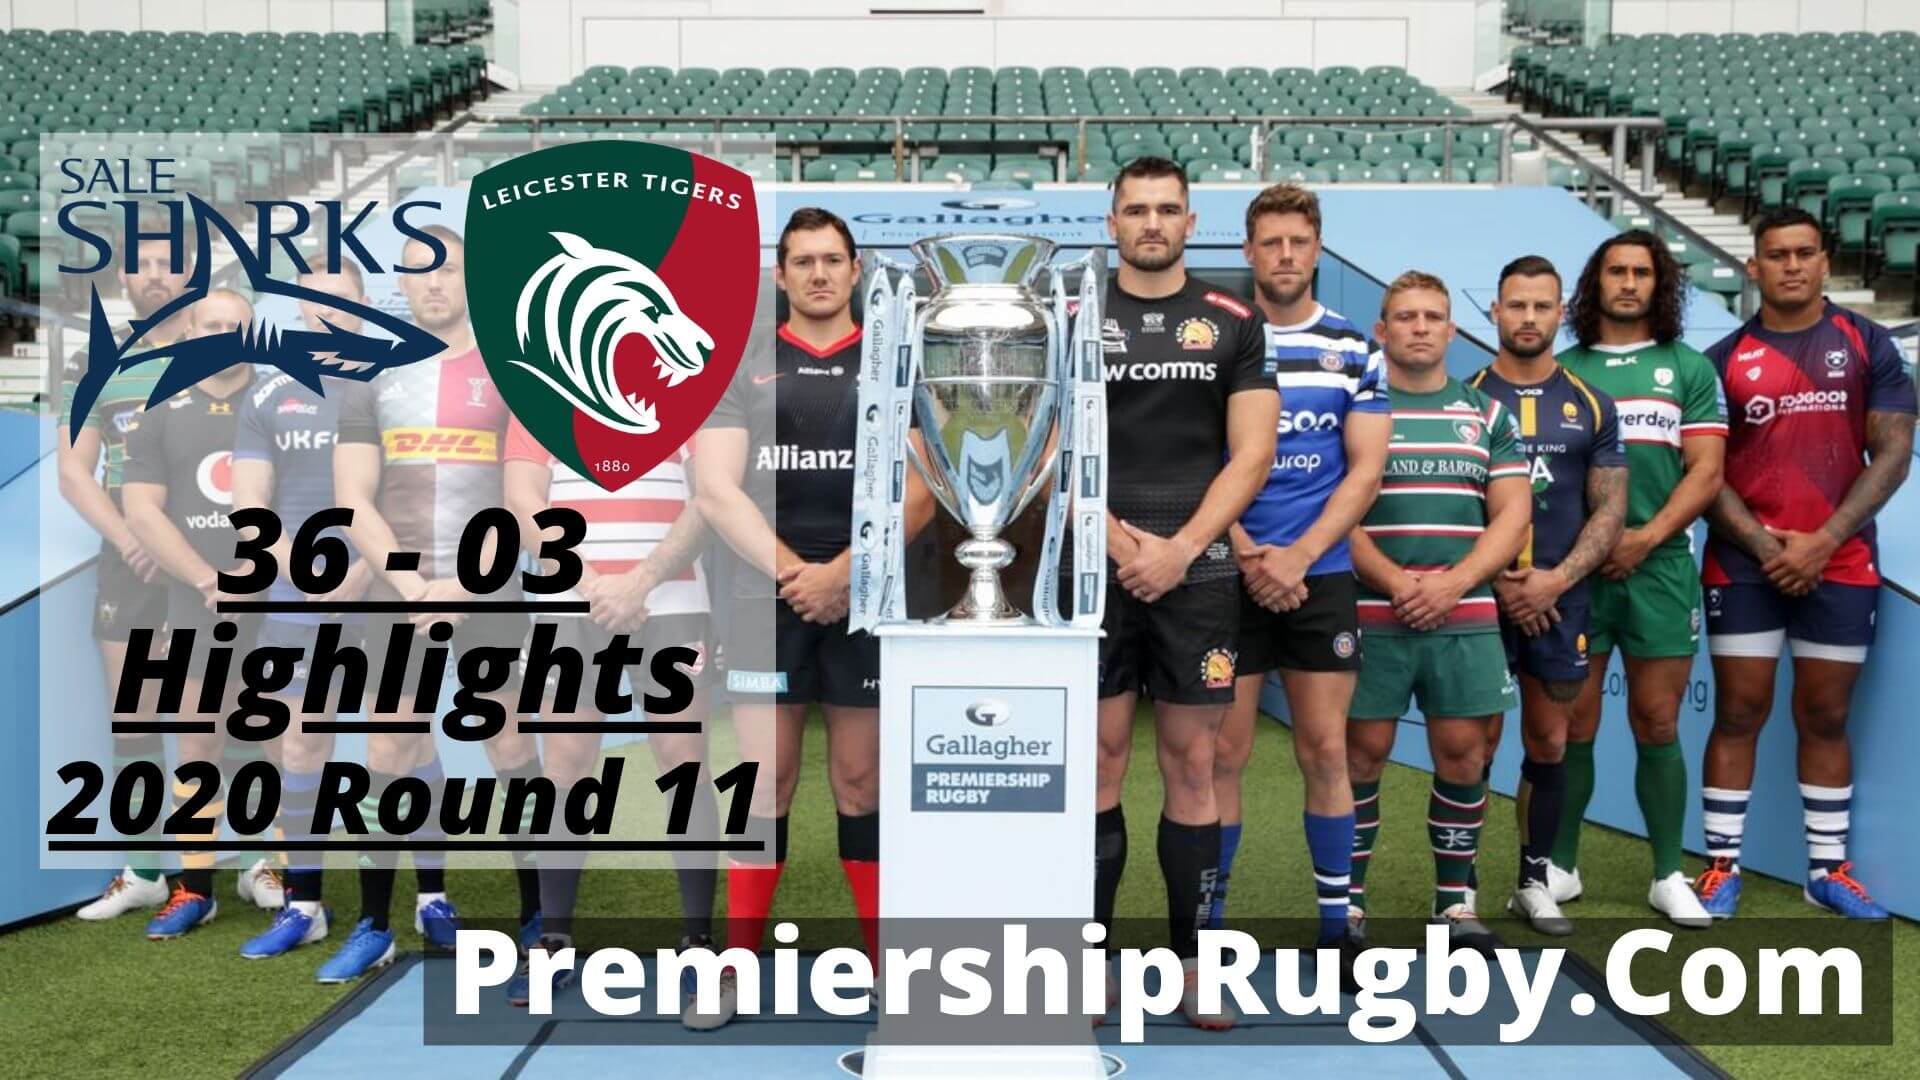 Sale Sharks Vs Leicester Tigers Highlights 2020 Rd 11